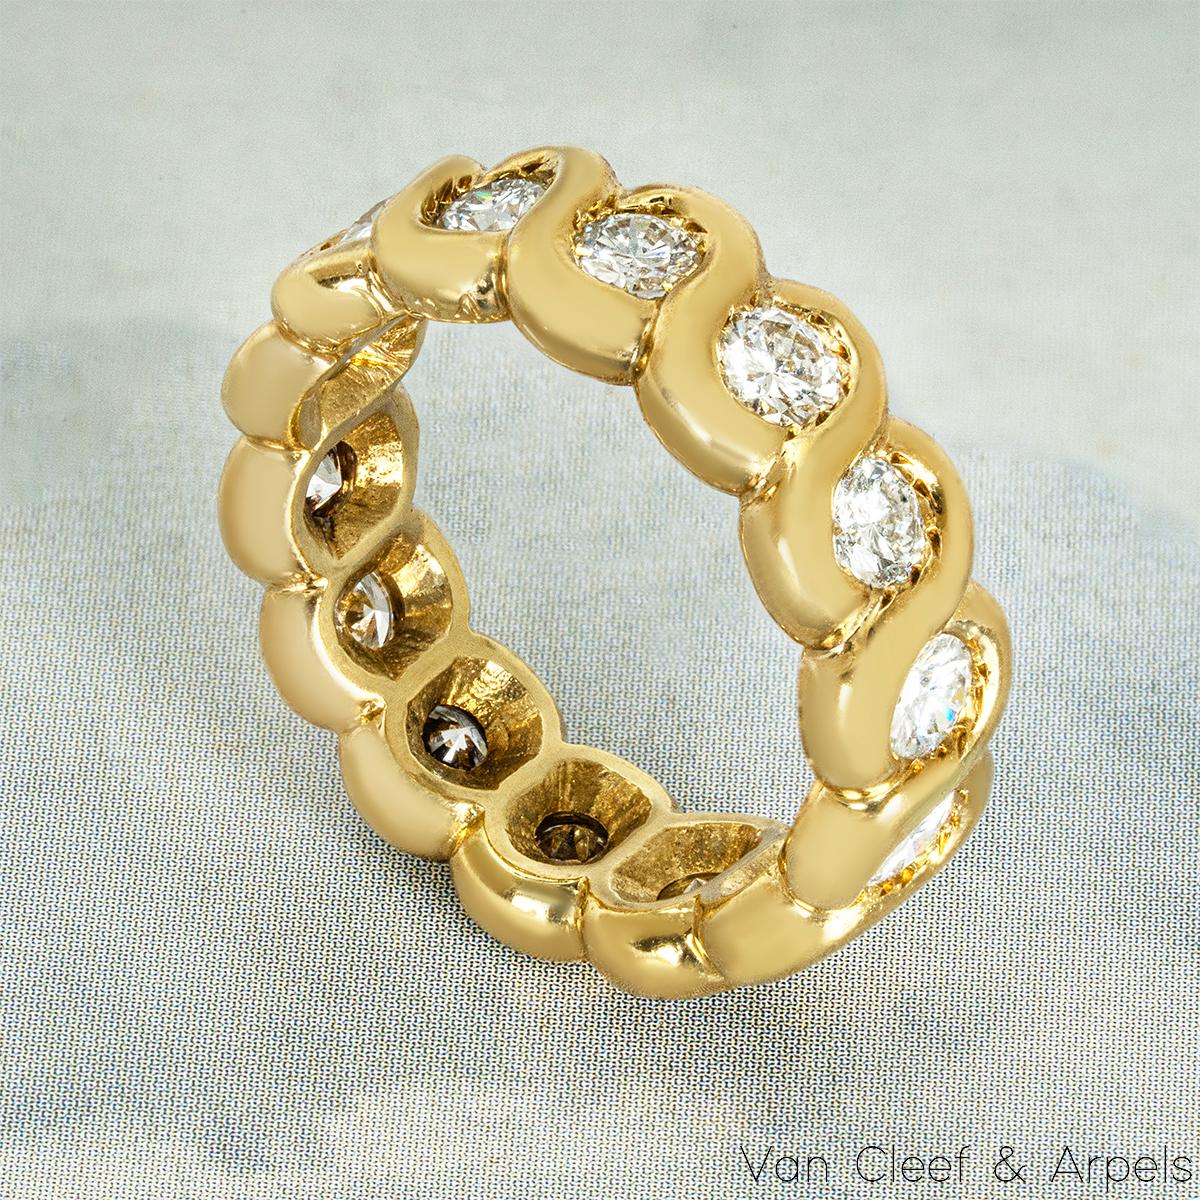 Round Cut Van Cleef & Arpels Yellow Gold Diamond Eternity Wedding Band Ring 1.40 Cts For Sale